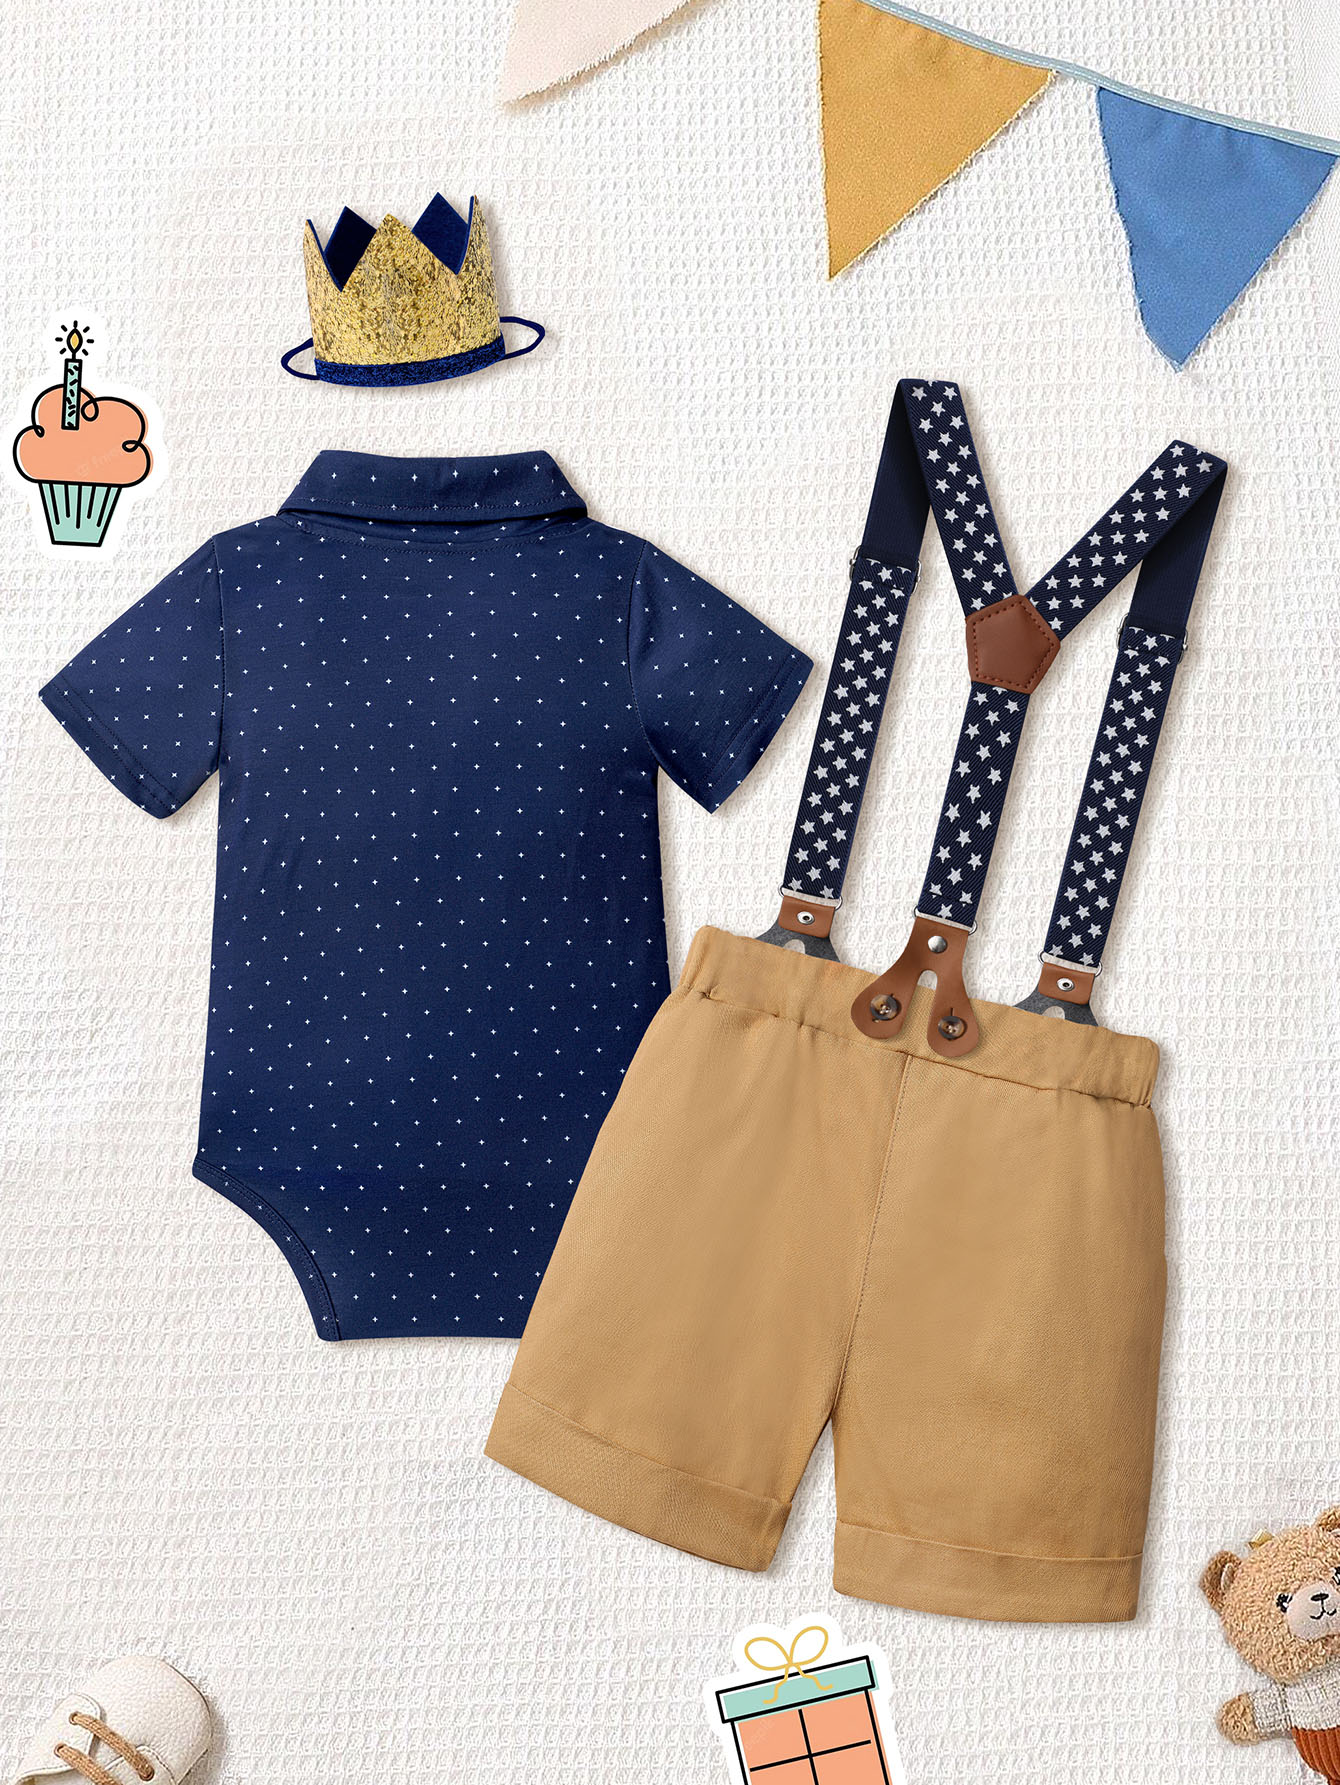 Boys First Birthday Outfit Cake Smash Baby Blue and Navy 1 2 